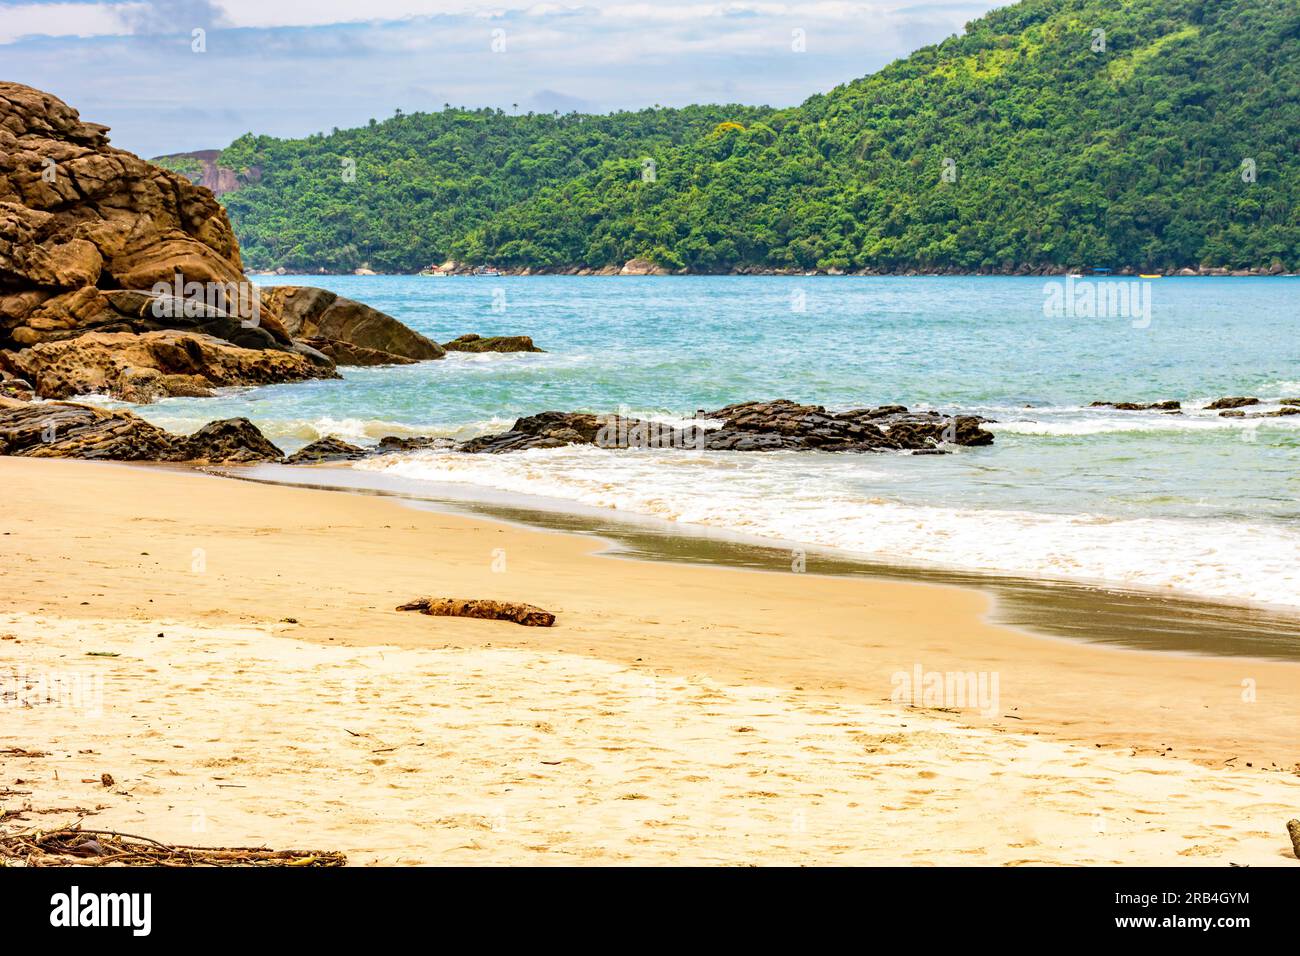 The sea between the beach, rocks and fully preserved rainforest in Trindade, Paraty district in Rio de Janeiro Stock Photo